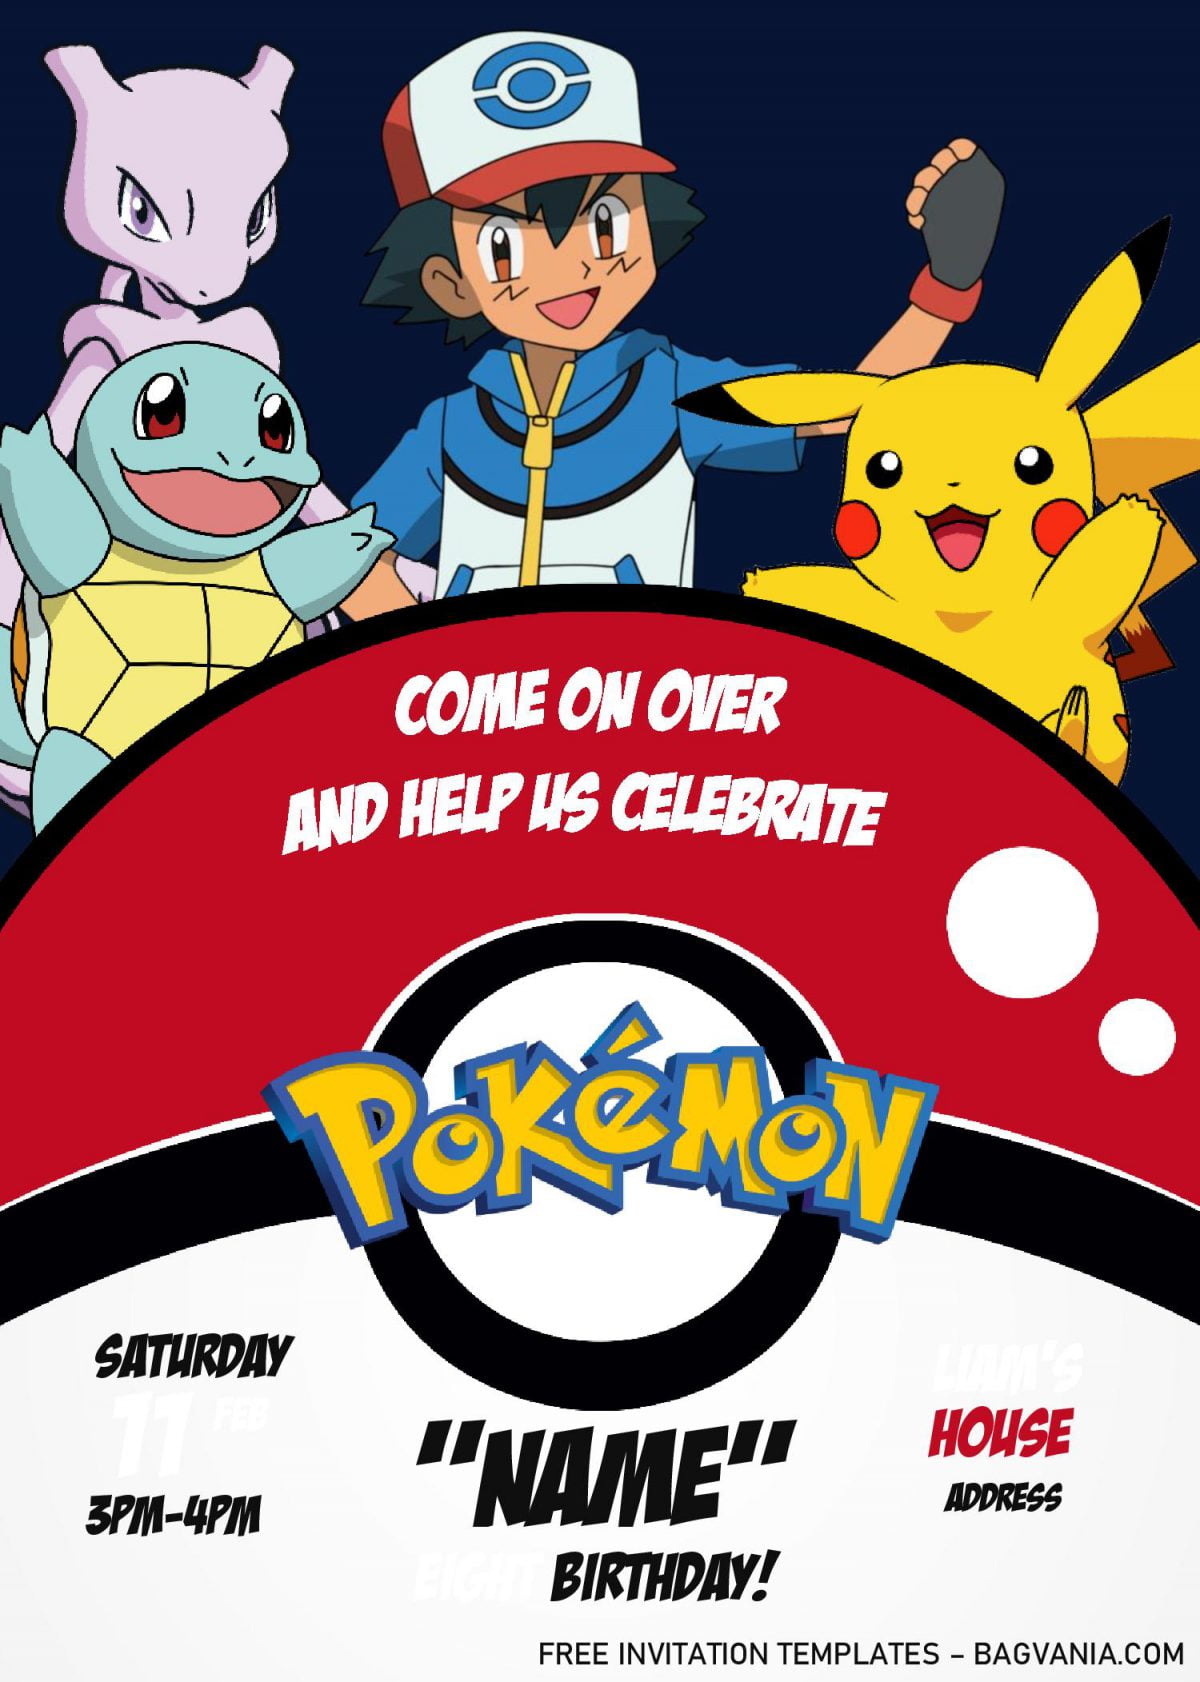 Pokemon Invitation Templates - Editable With MS Word and has squirtle.